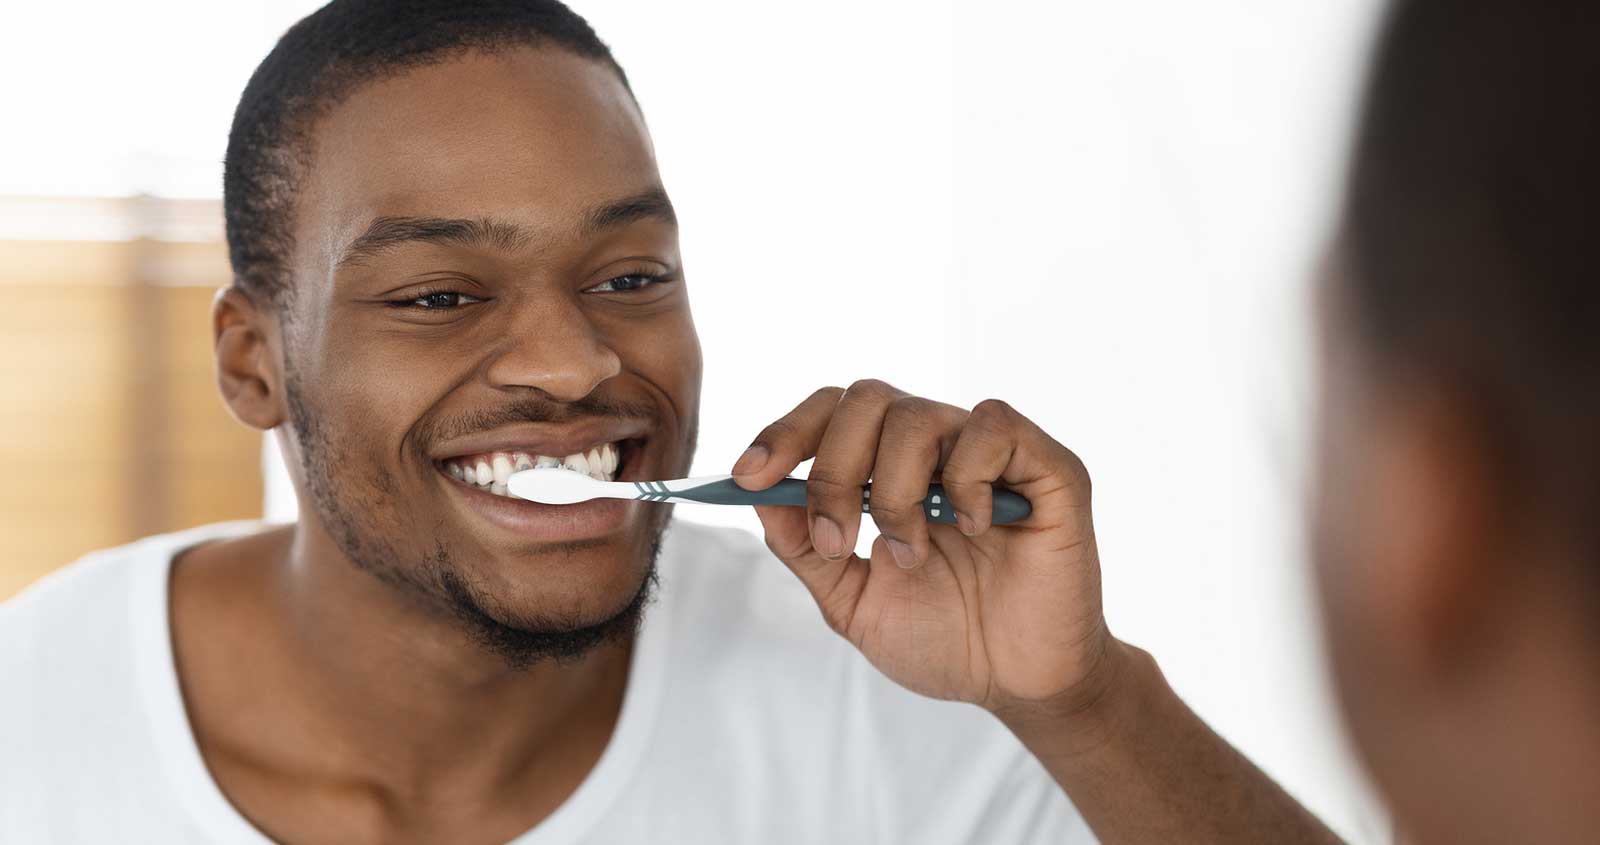 Man Brushing Teeth In Front Of A Mirror